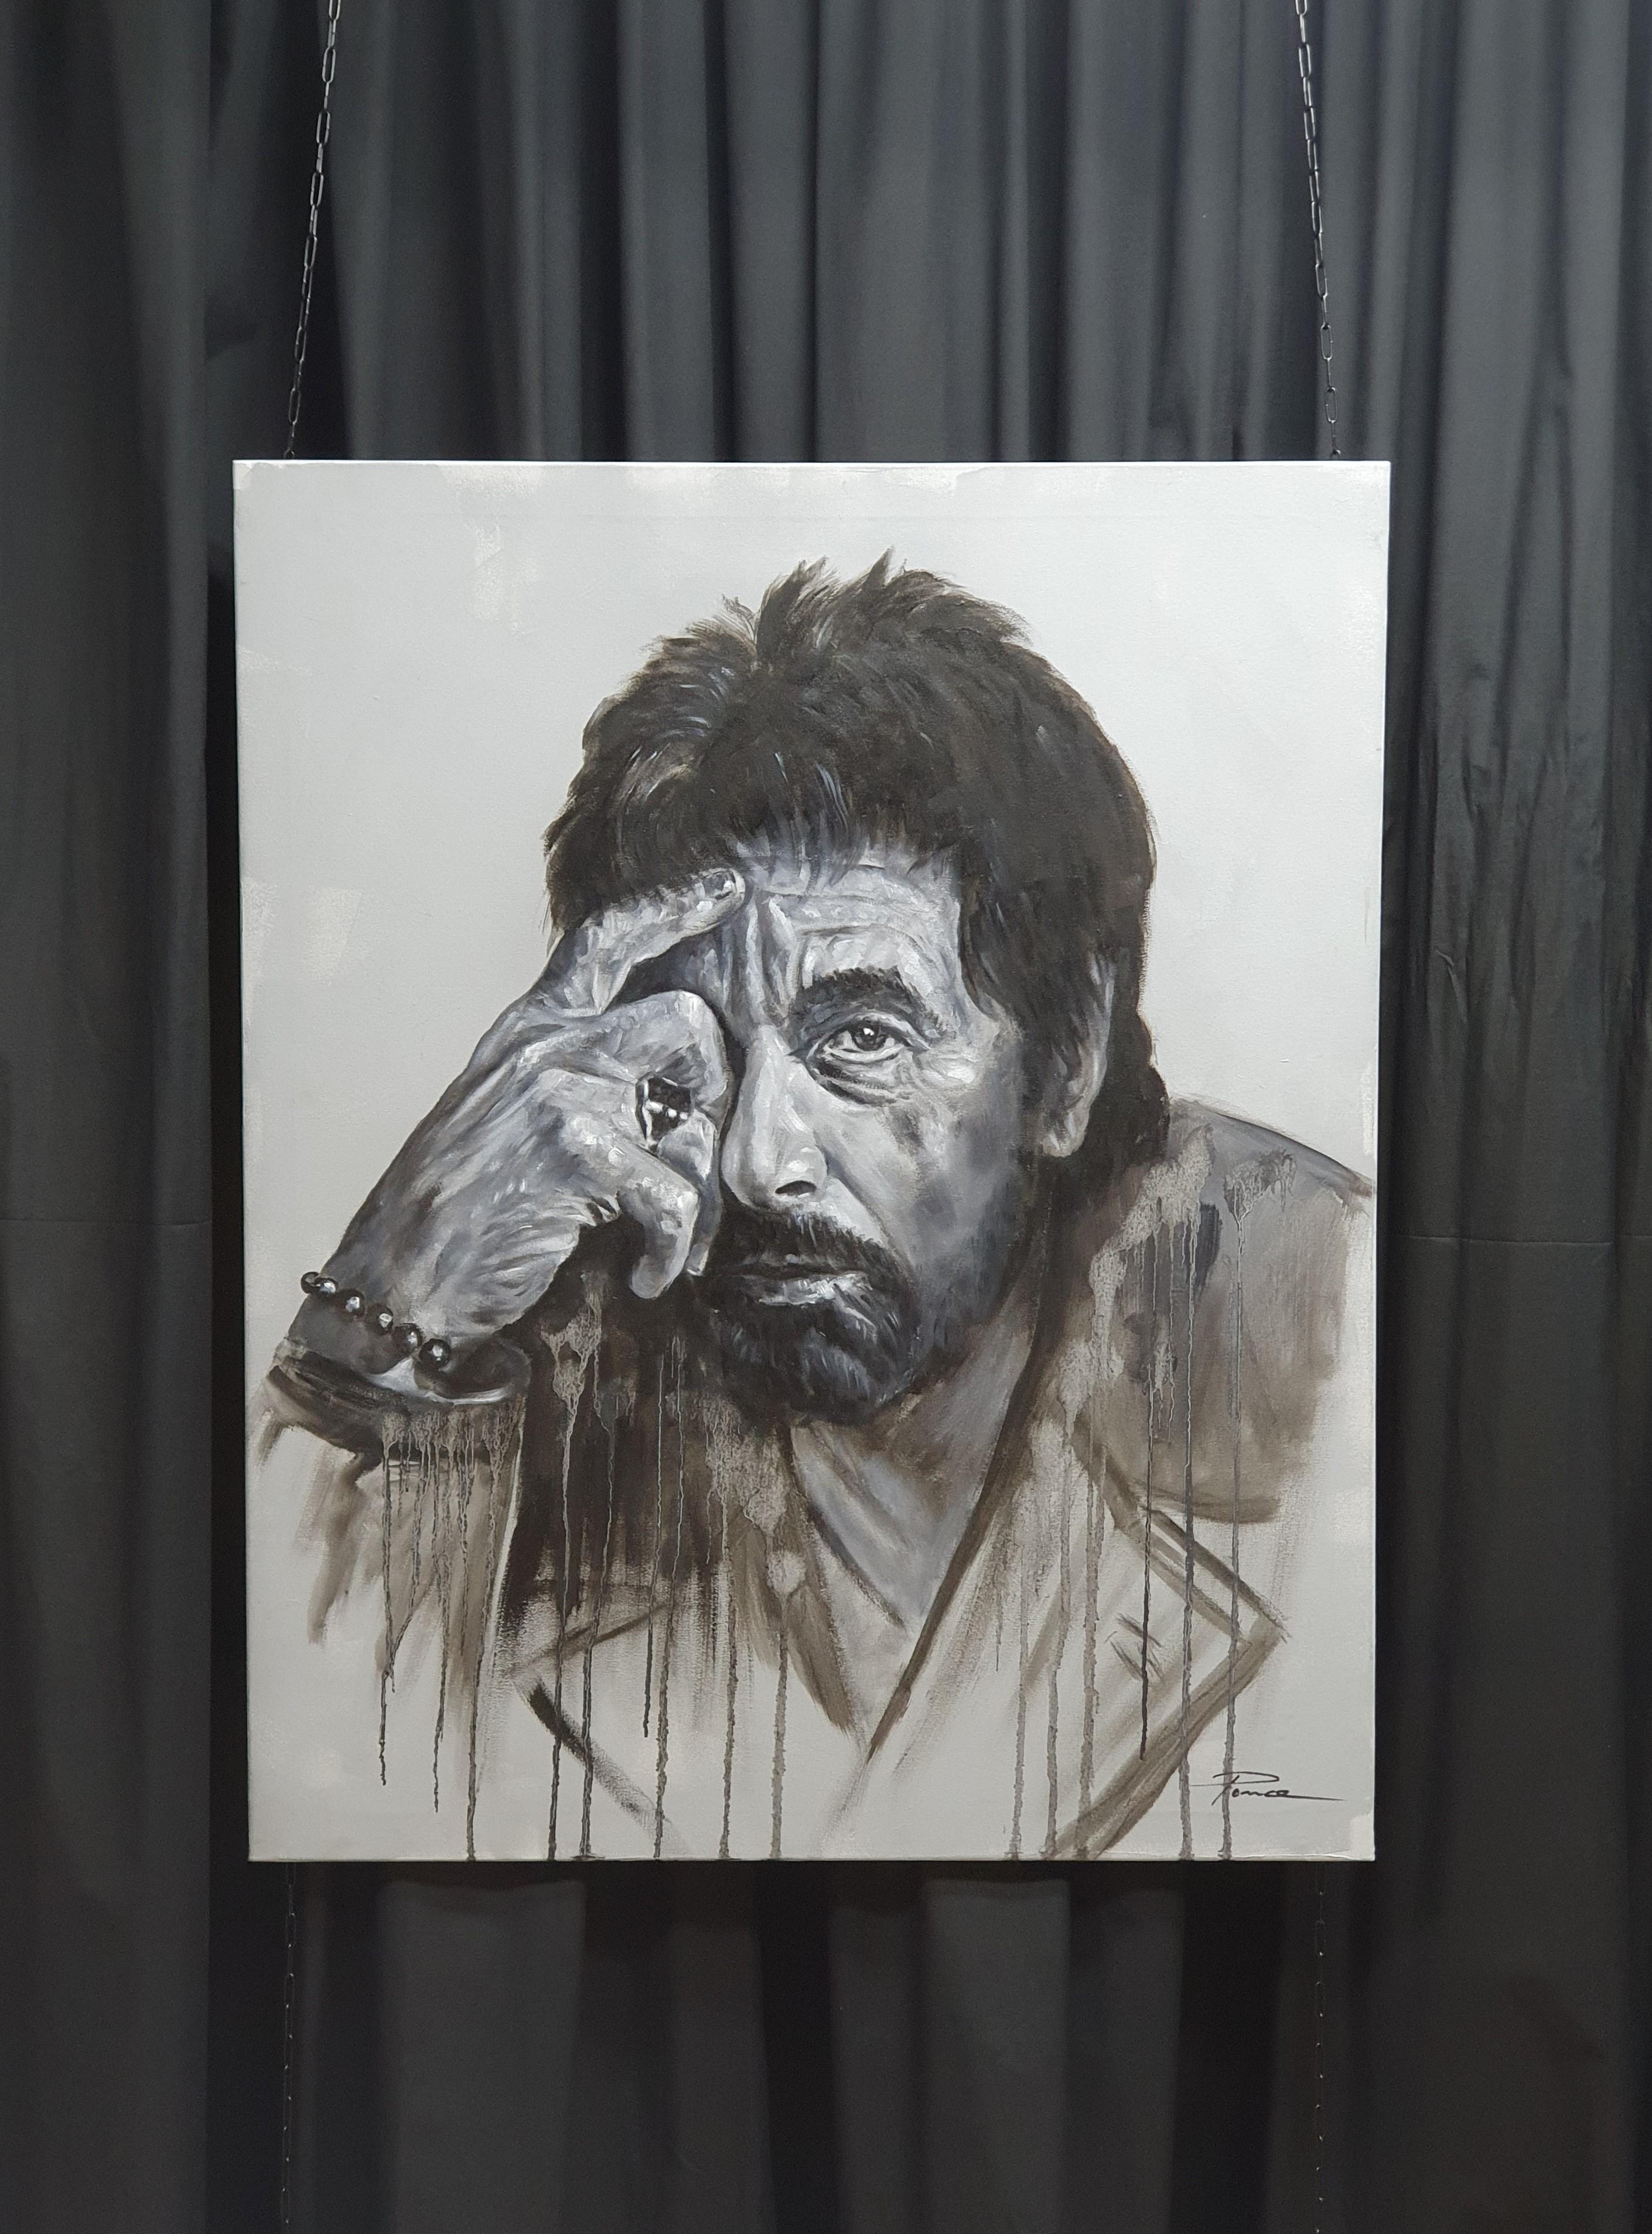 Figurative work by Al Pacino in black and white